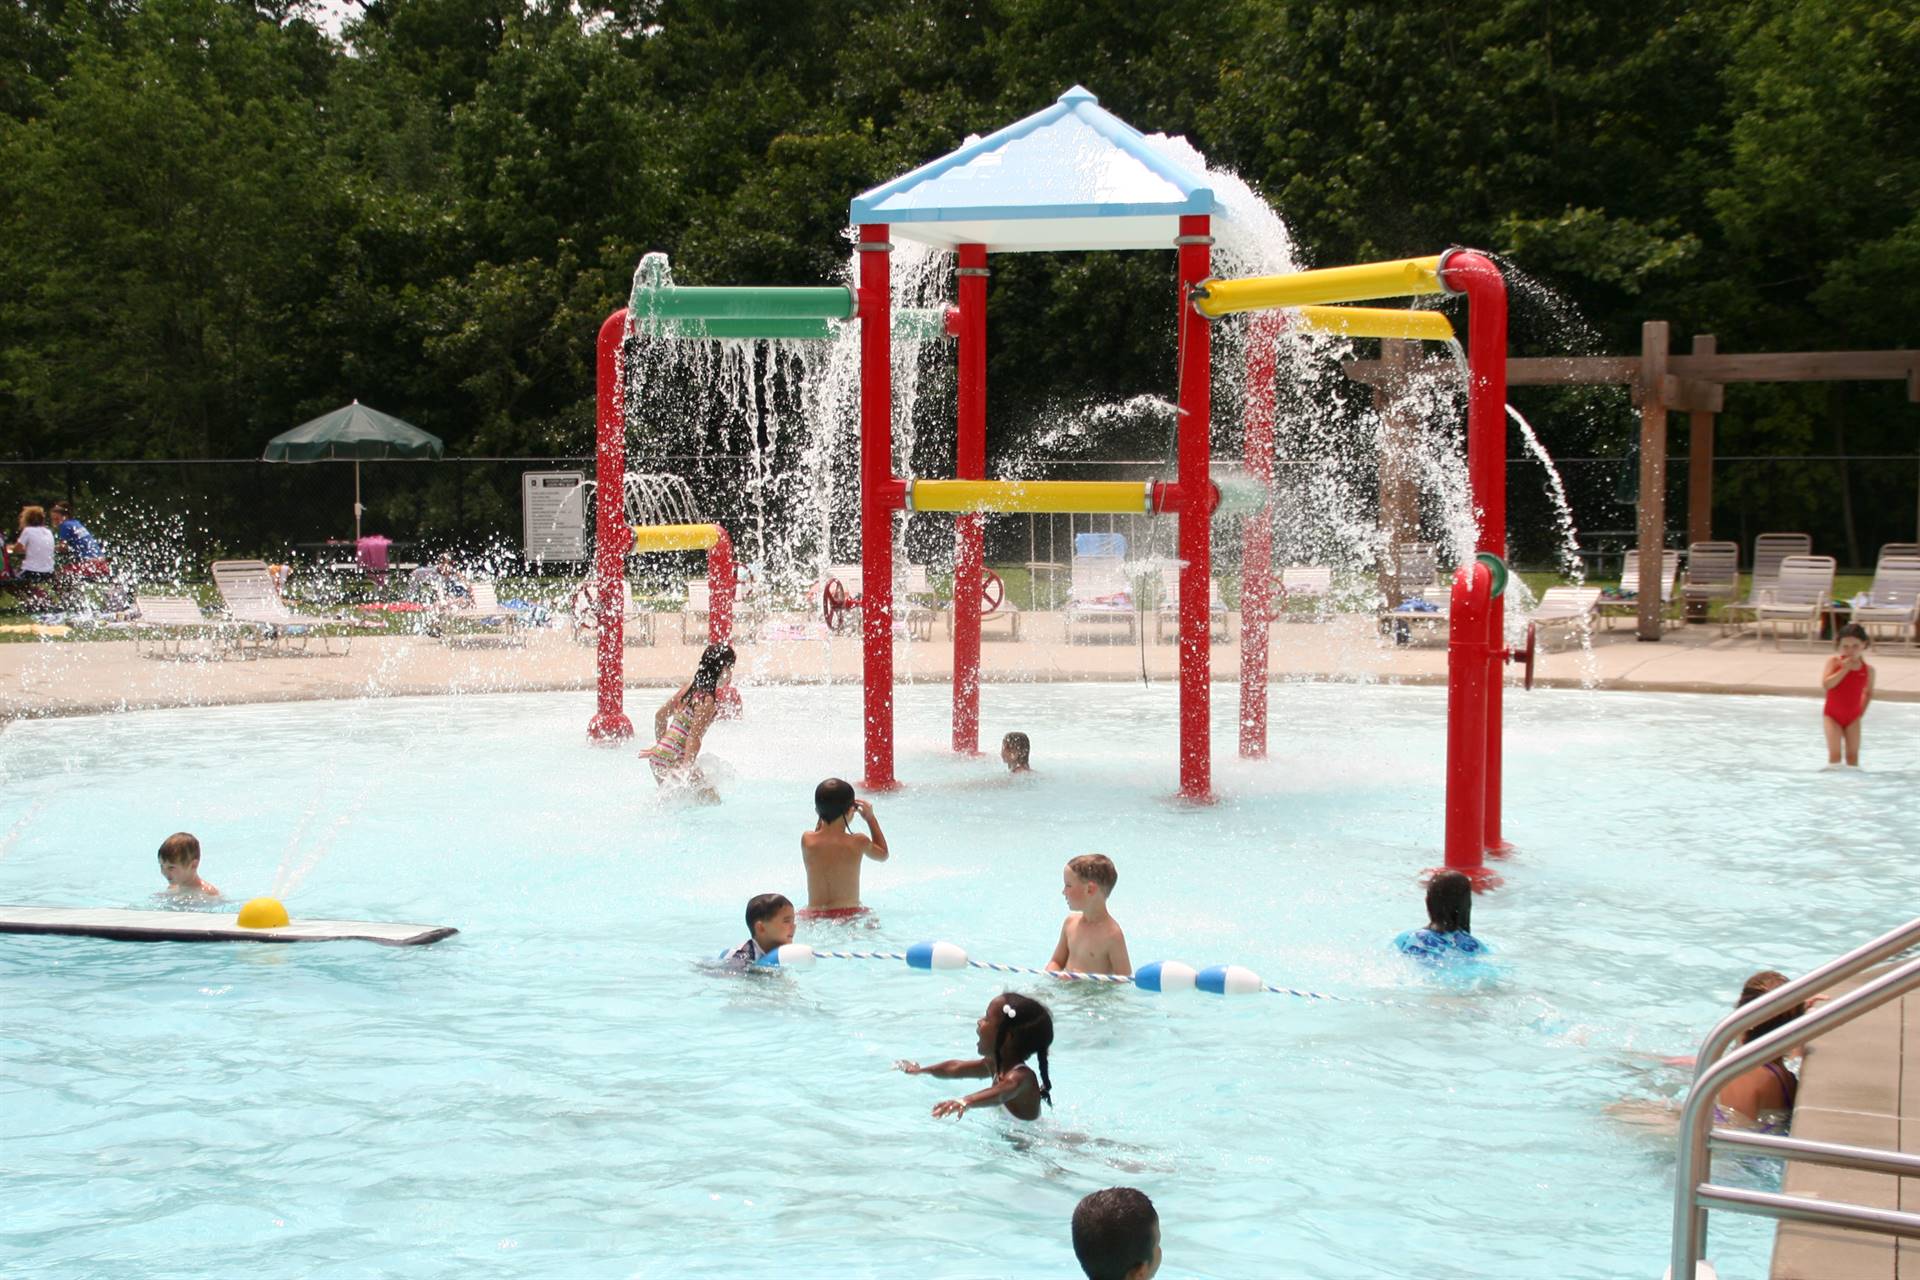 Children playing in the splash area of the outdoor pool 